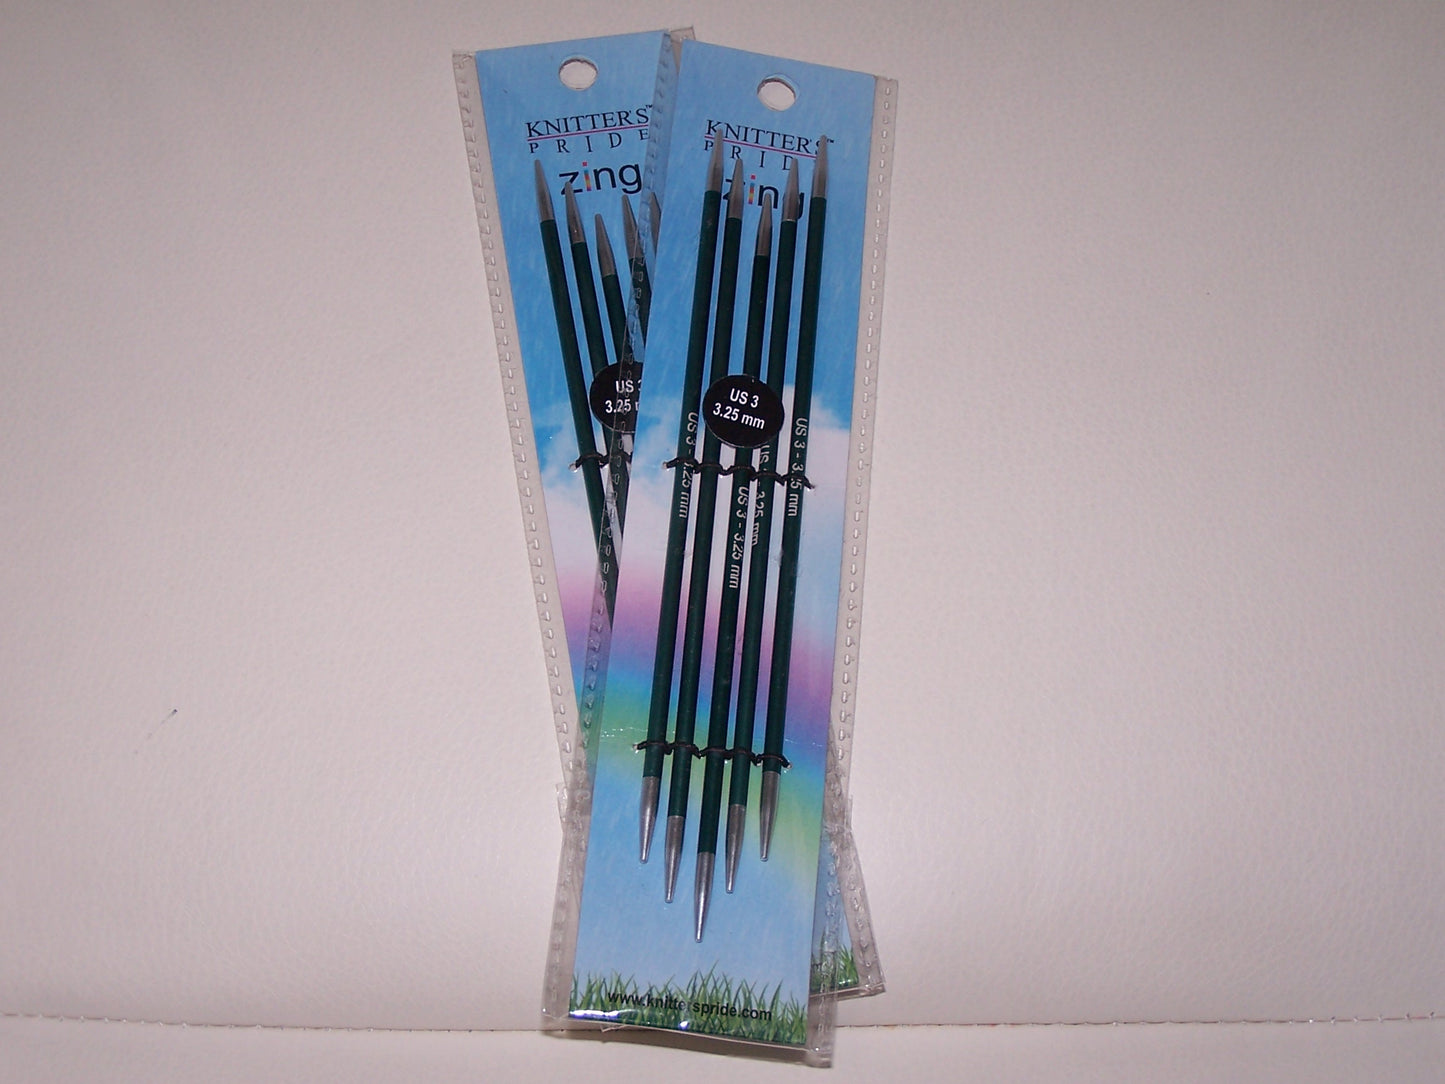 Knitter's Pride Zing US 3 (3.25mm) size 6 inch DPN's